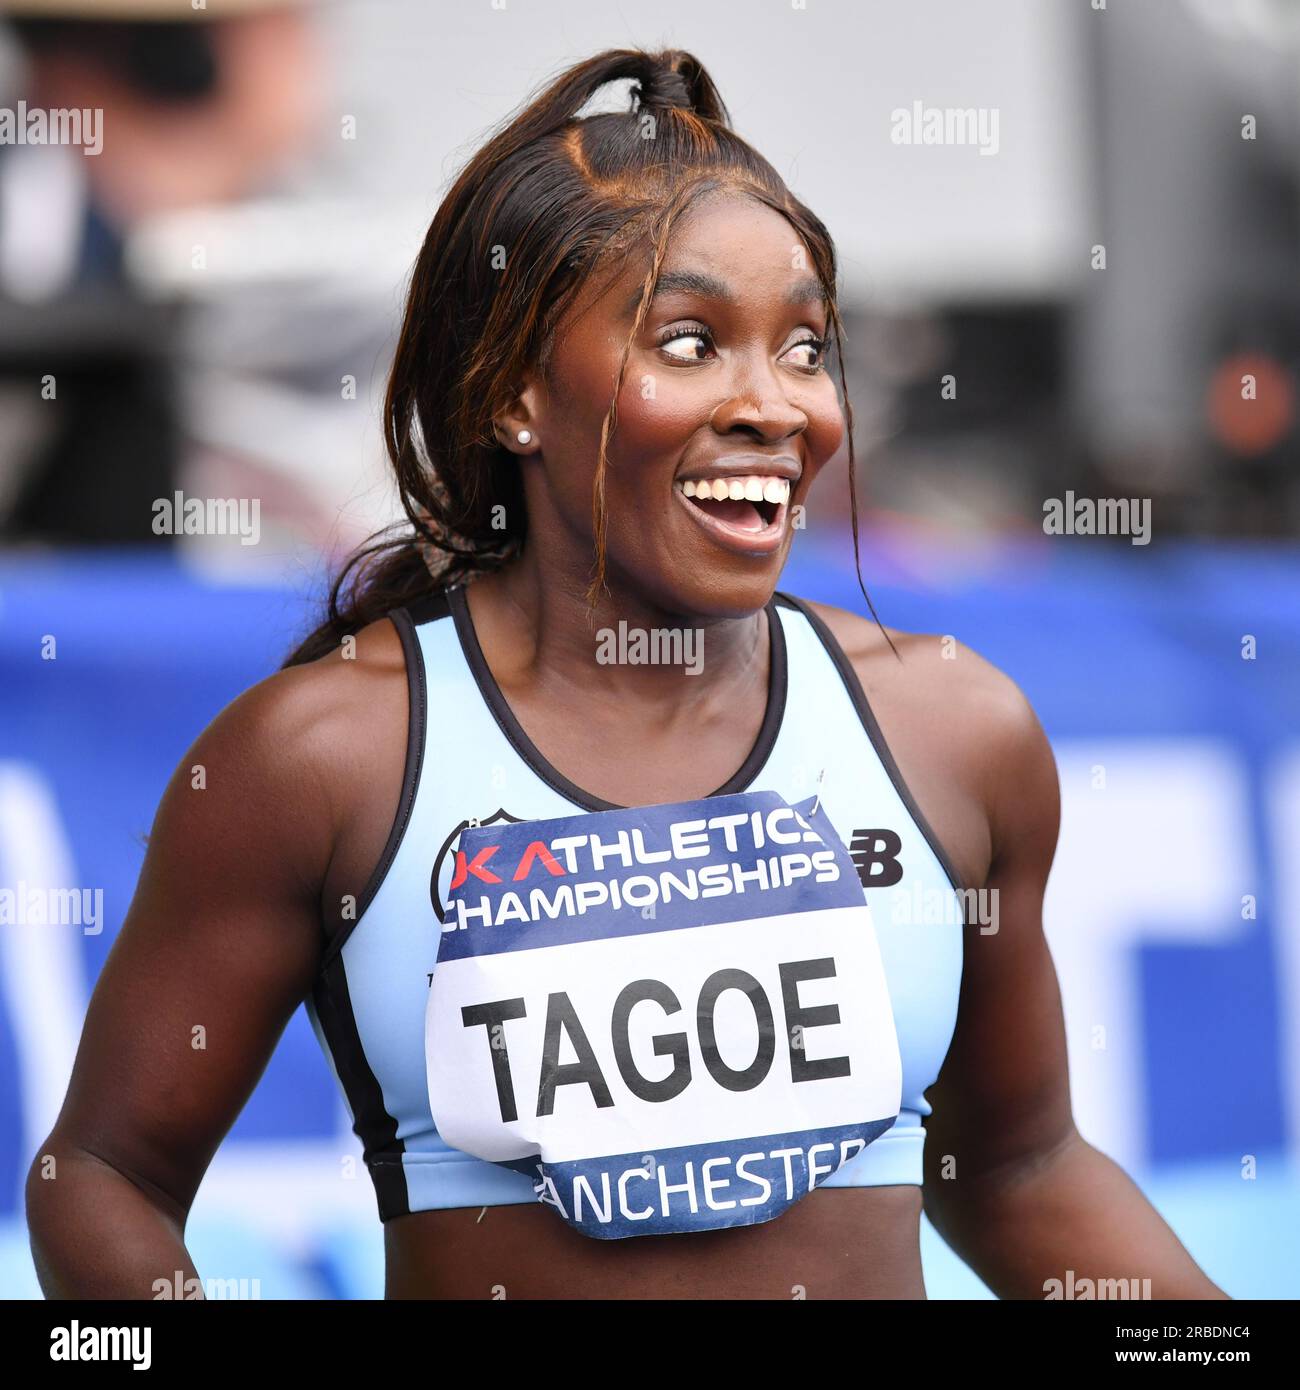 Manchester Regional Arena, Manchester, UK.  National UK Athletics Championships 2023.  Caption: TAGOE - Womens 100 Meters   Picture: Mark Dunn/Alamy Live News (Sport) Credit: Mark Dunn Photography/Alamy Live News Stock Photo